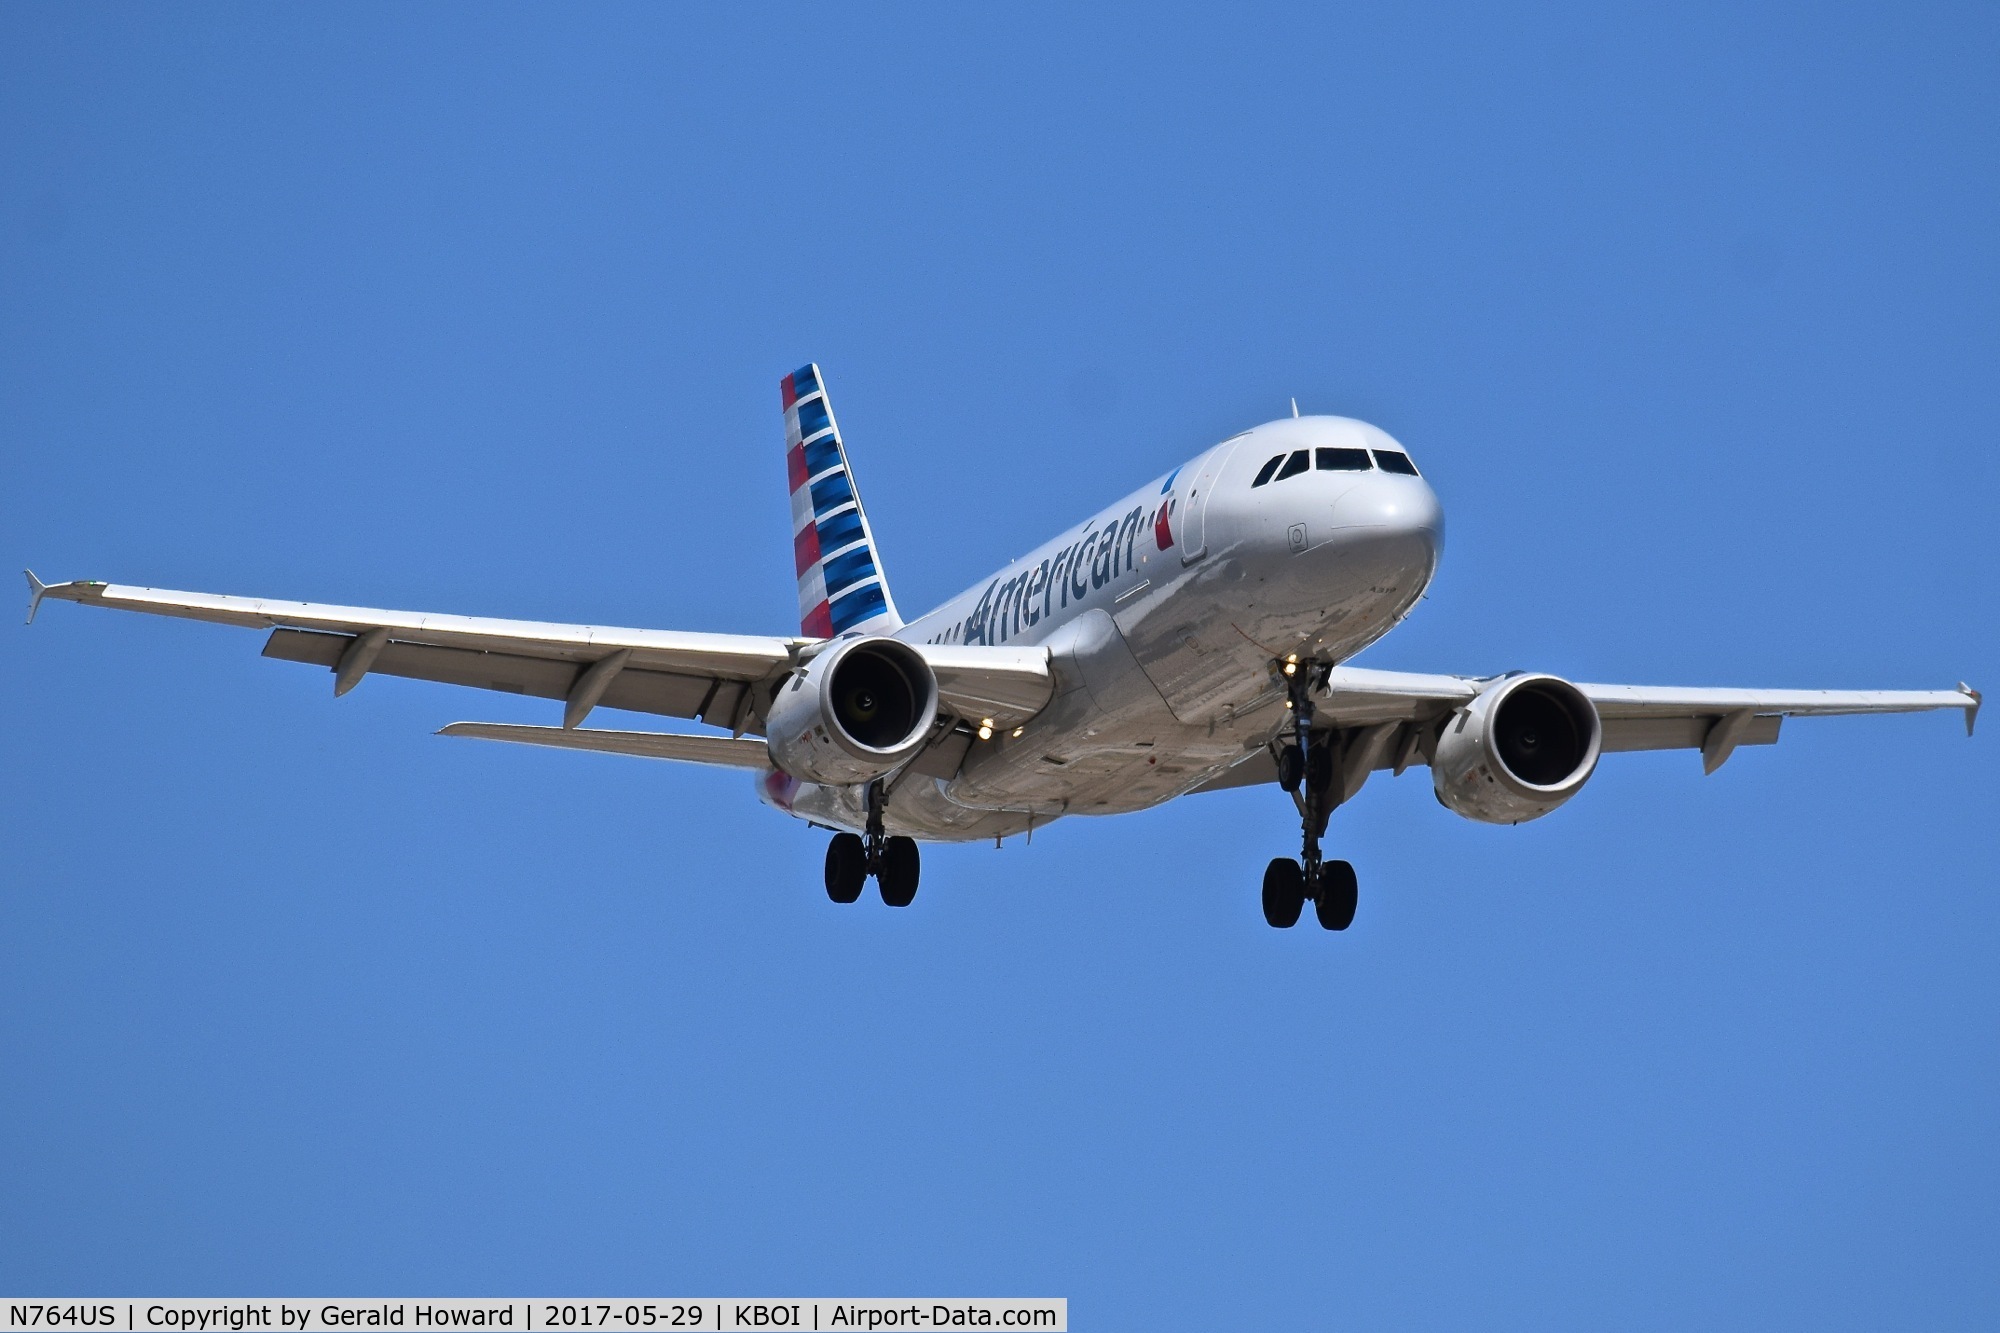 N764US, 2000 Airbus A319-112 C/N 1369, On approach for RWY 10L.